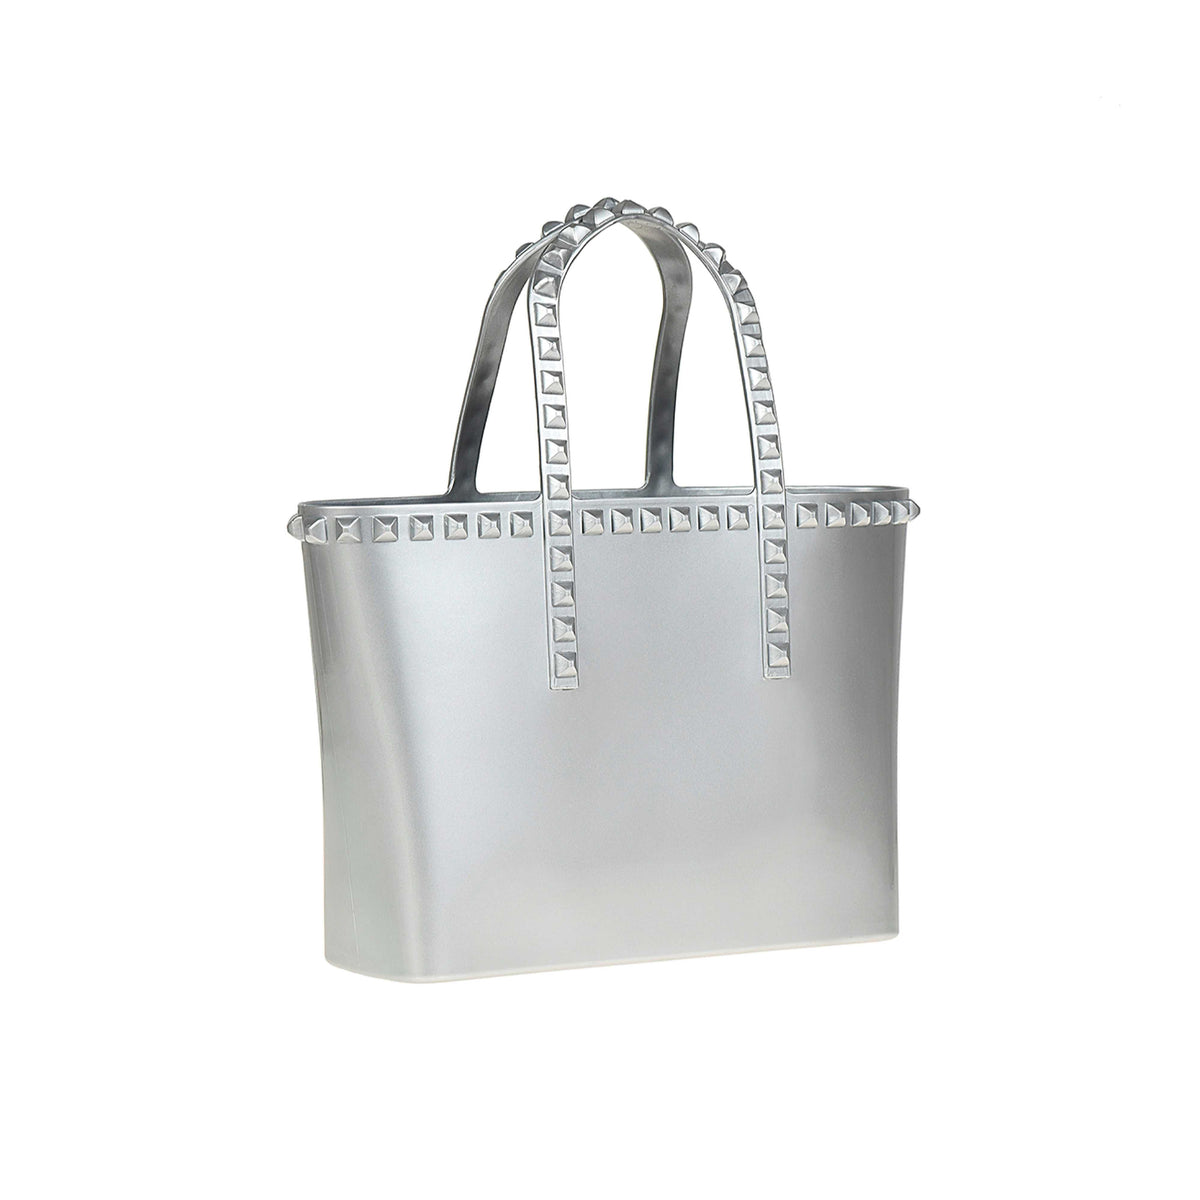 Mini jelly beach bags in color silver with studs